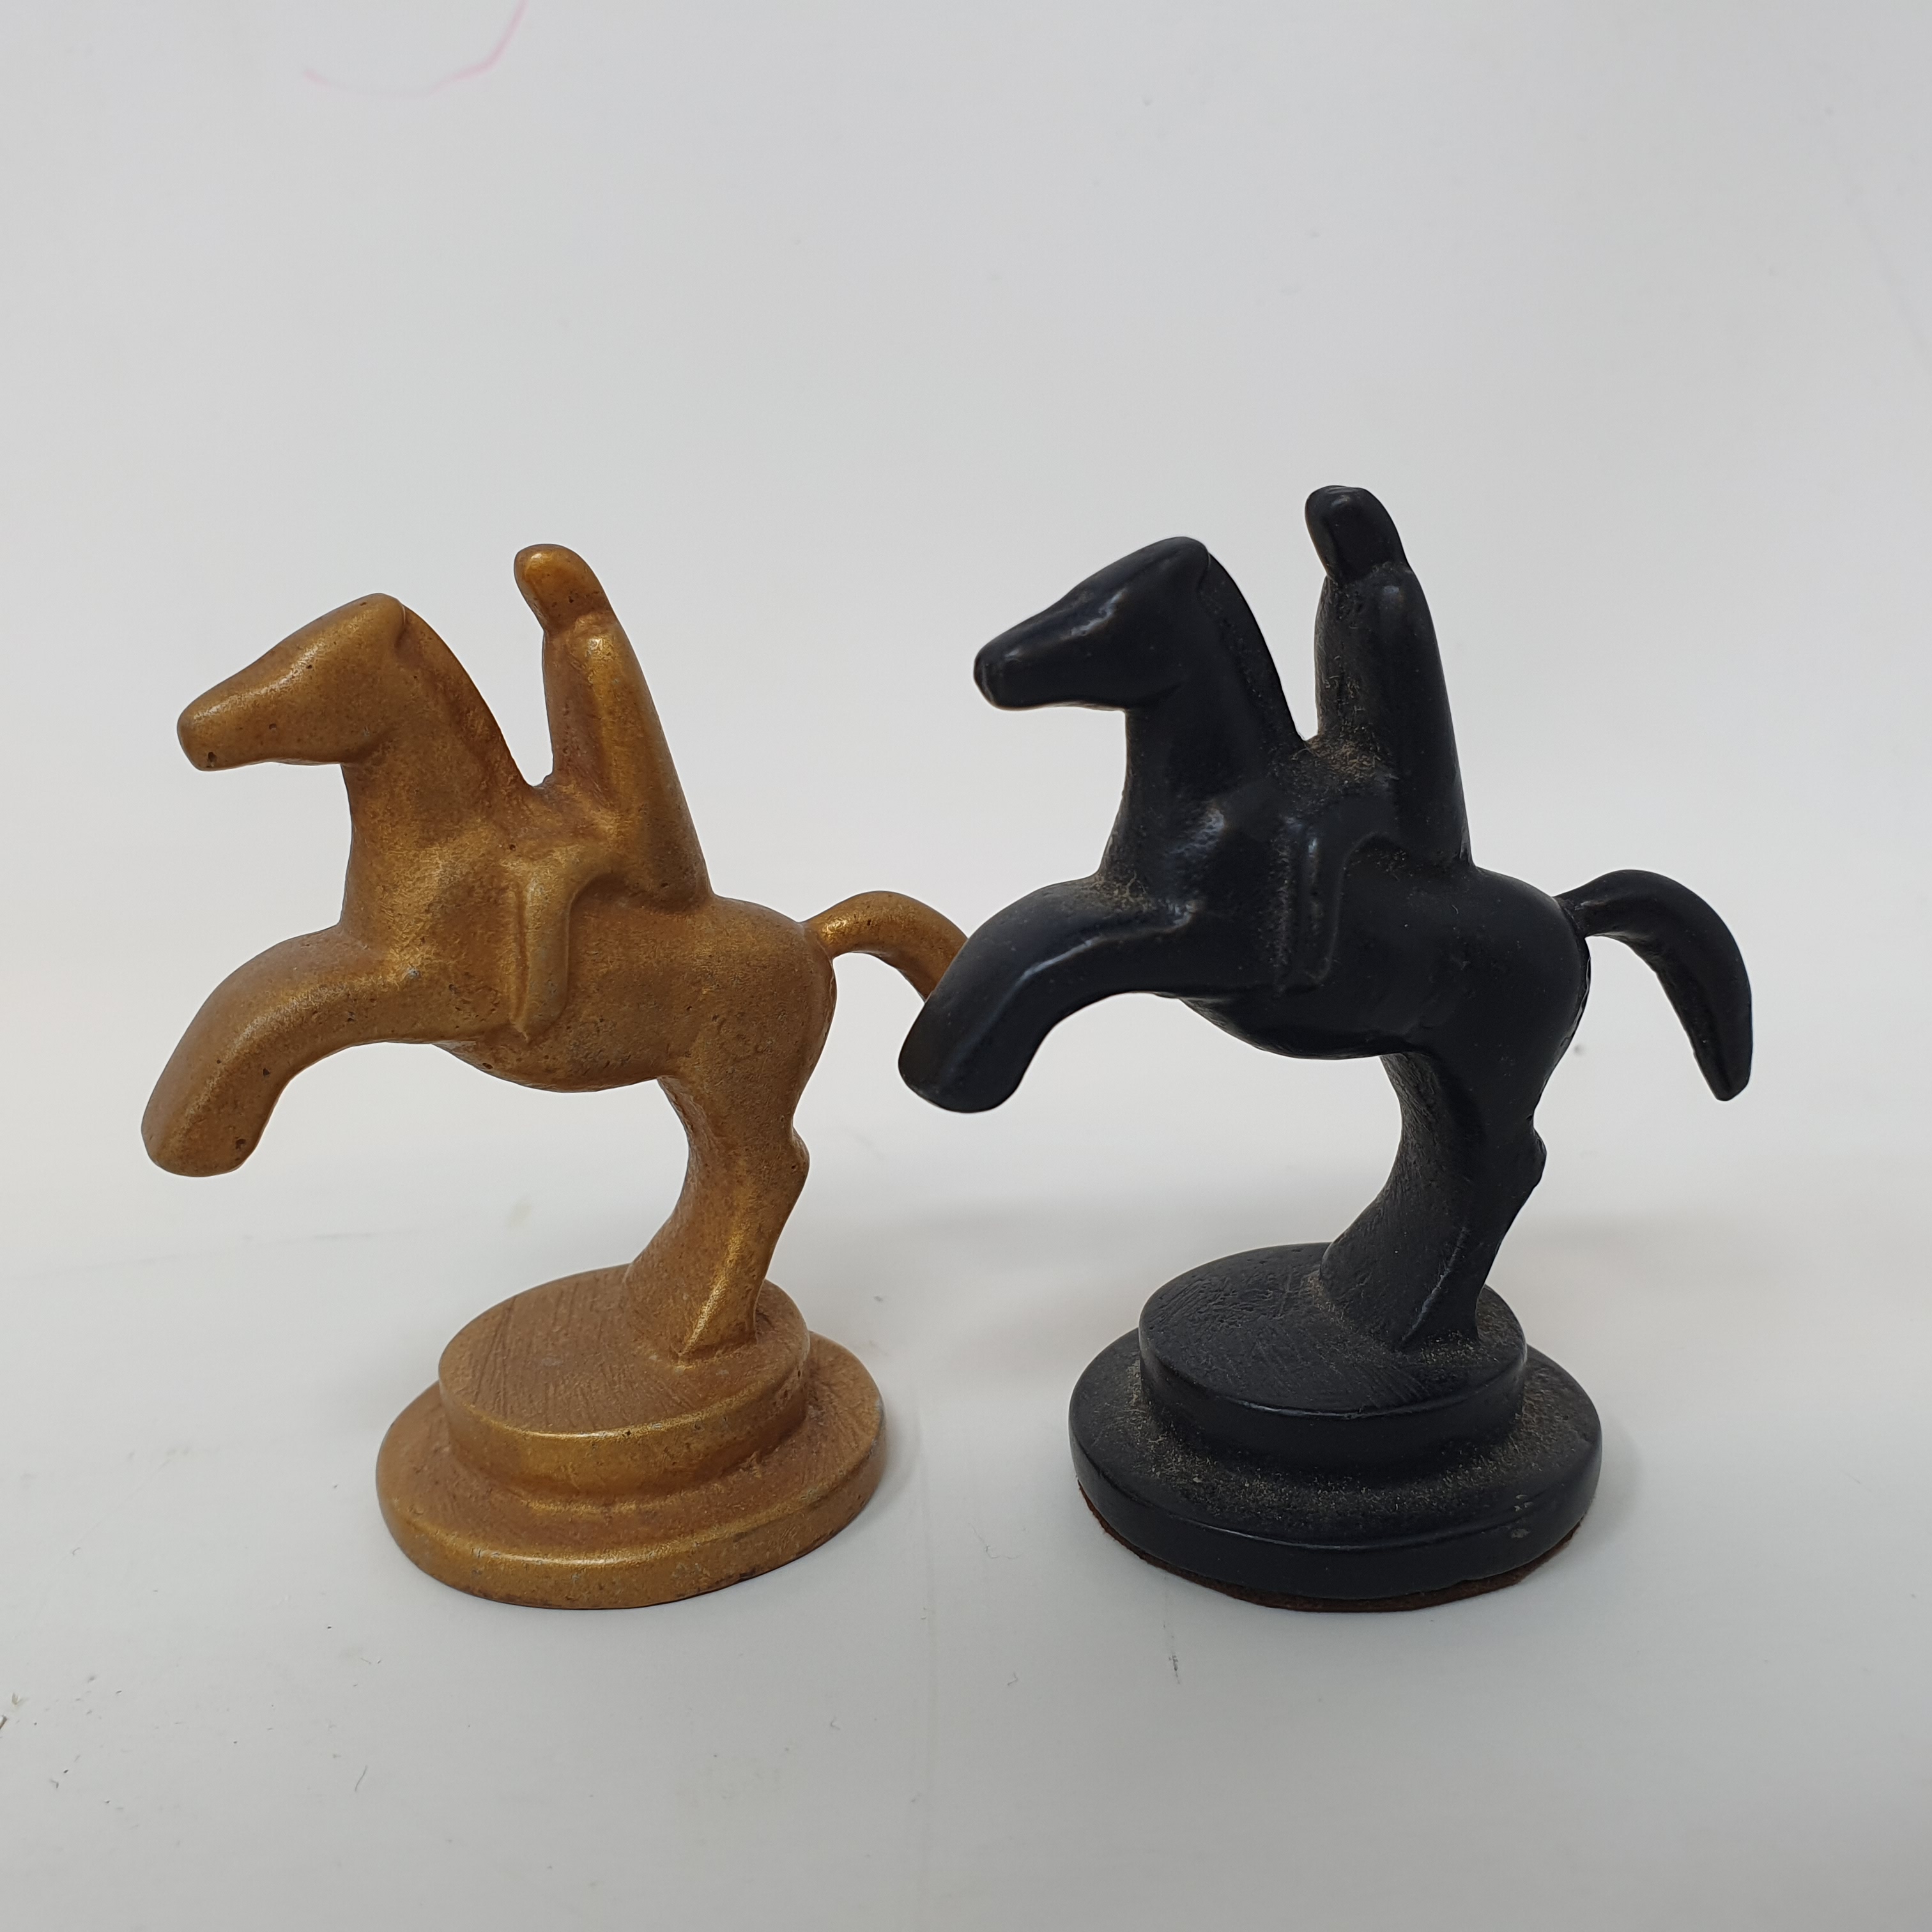 A Modernist chess set, by repute cast from aluminium/duralumin from a Spitfire, the king 8.5 cm high - Image 6 of 7